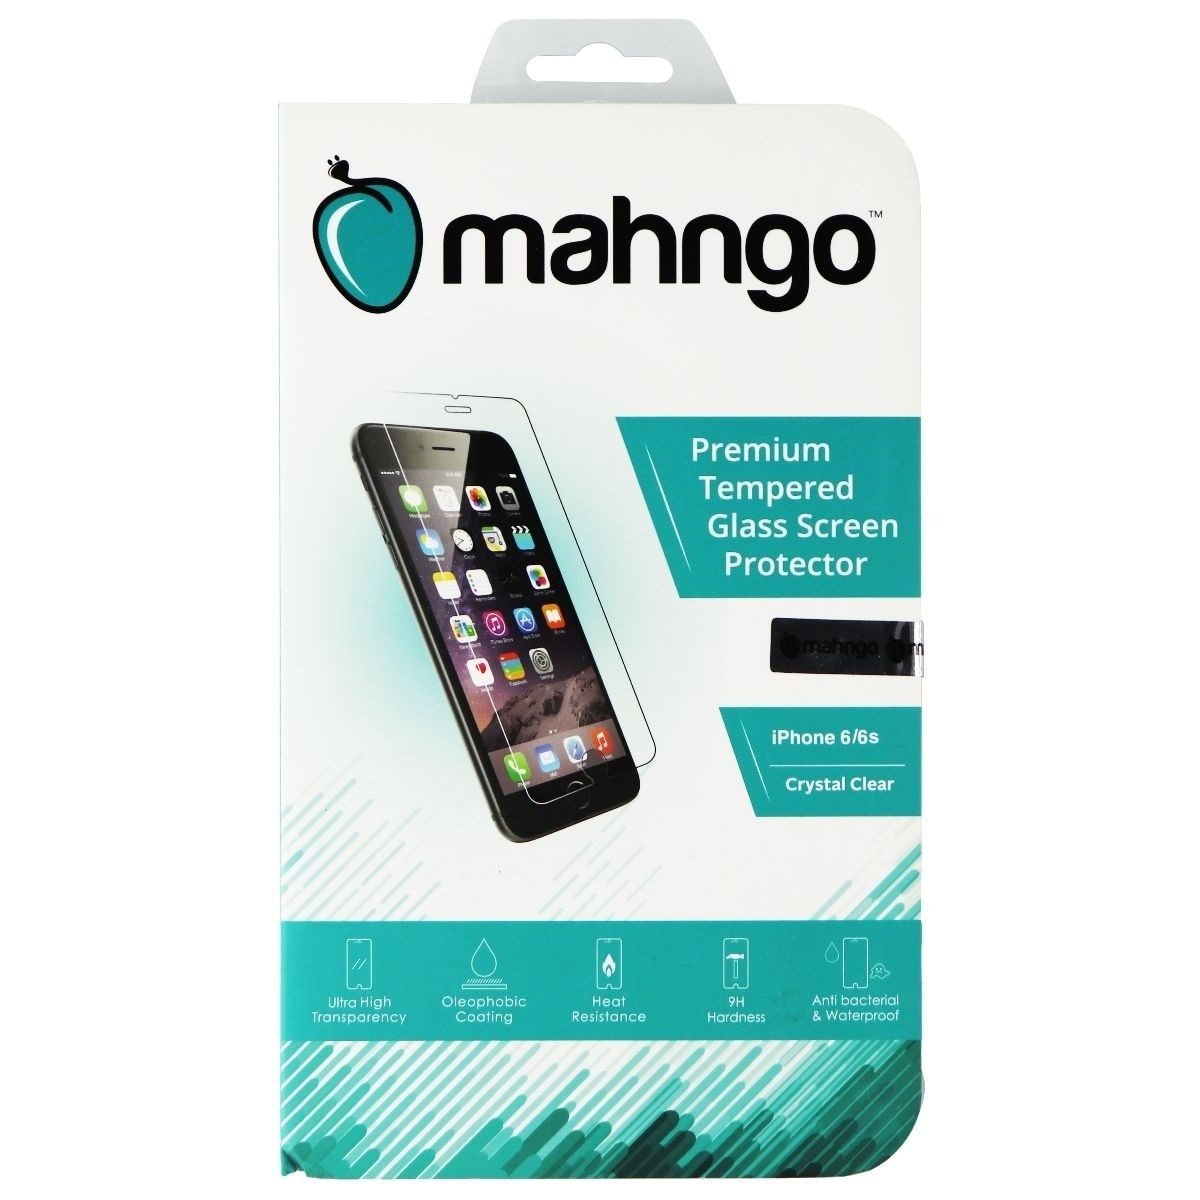 Mahngo Tempered Glass Screen Protector For Apple IPhone 6/6s - Crystal Clear